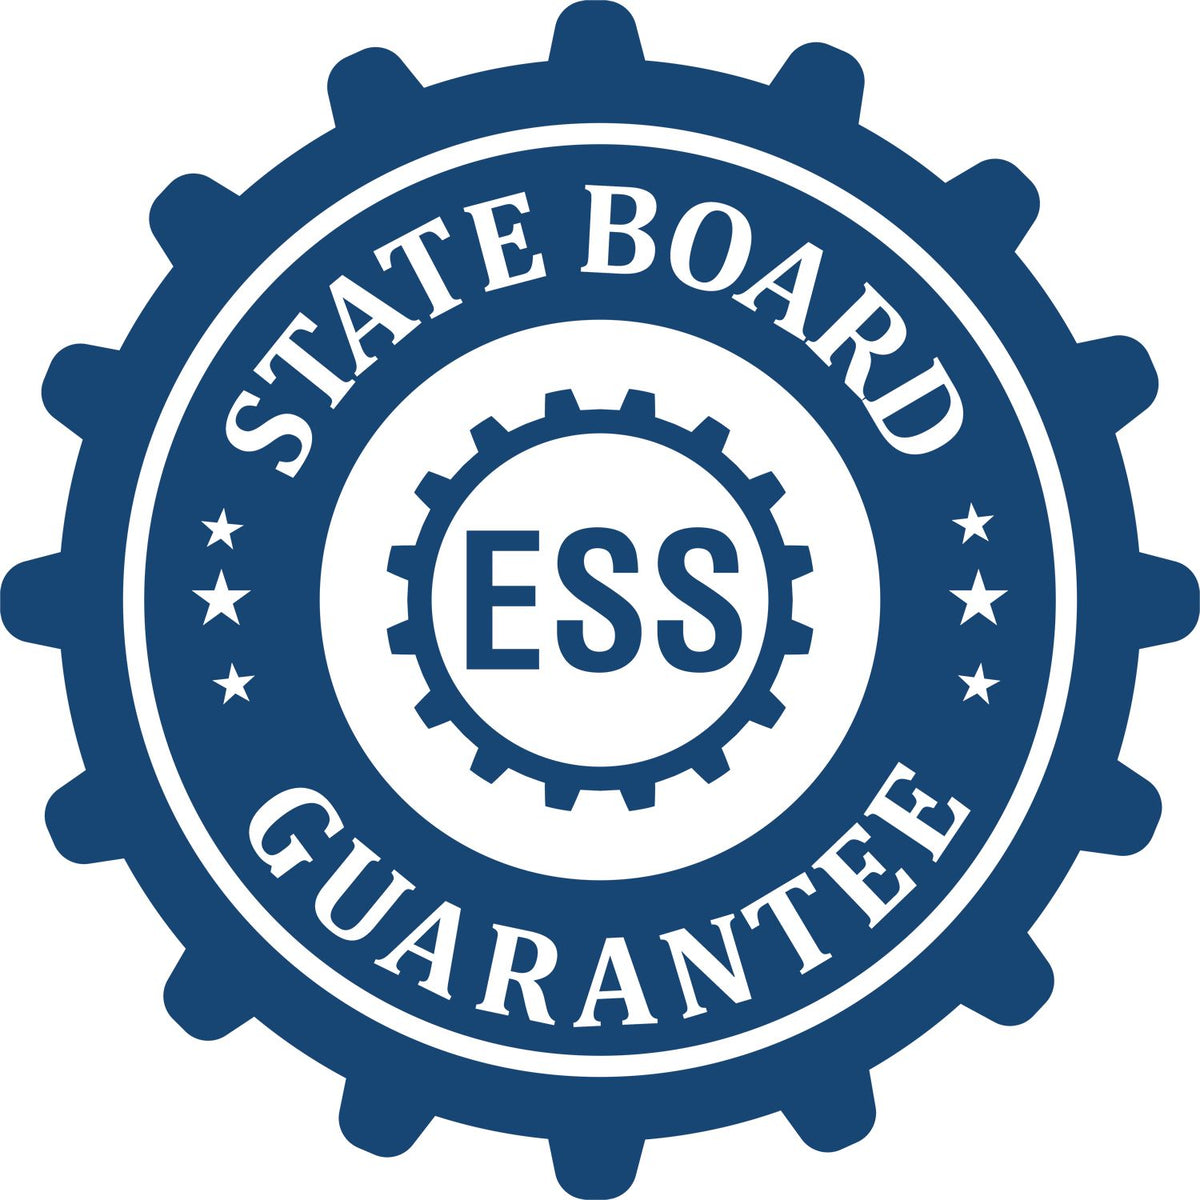 An emblem in a gear shape illustrating a state board guarantee for the Hybrid Montana Engineer Seal